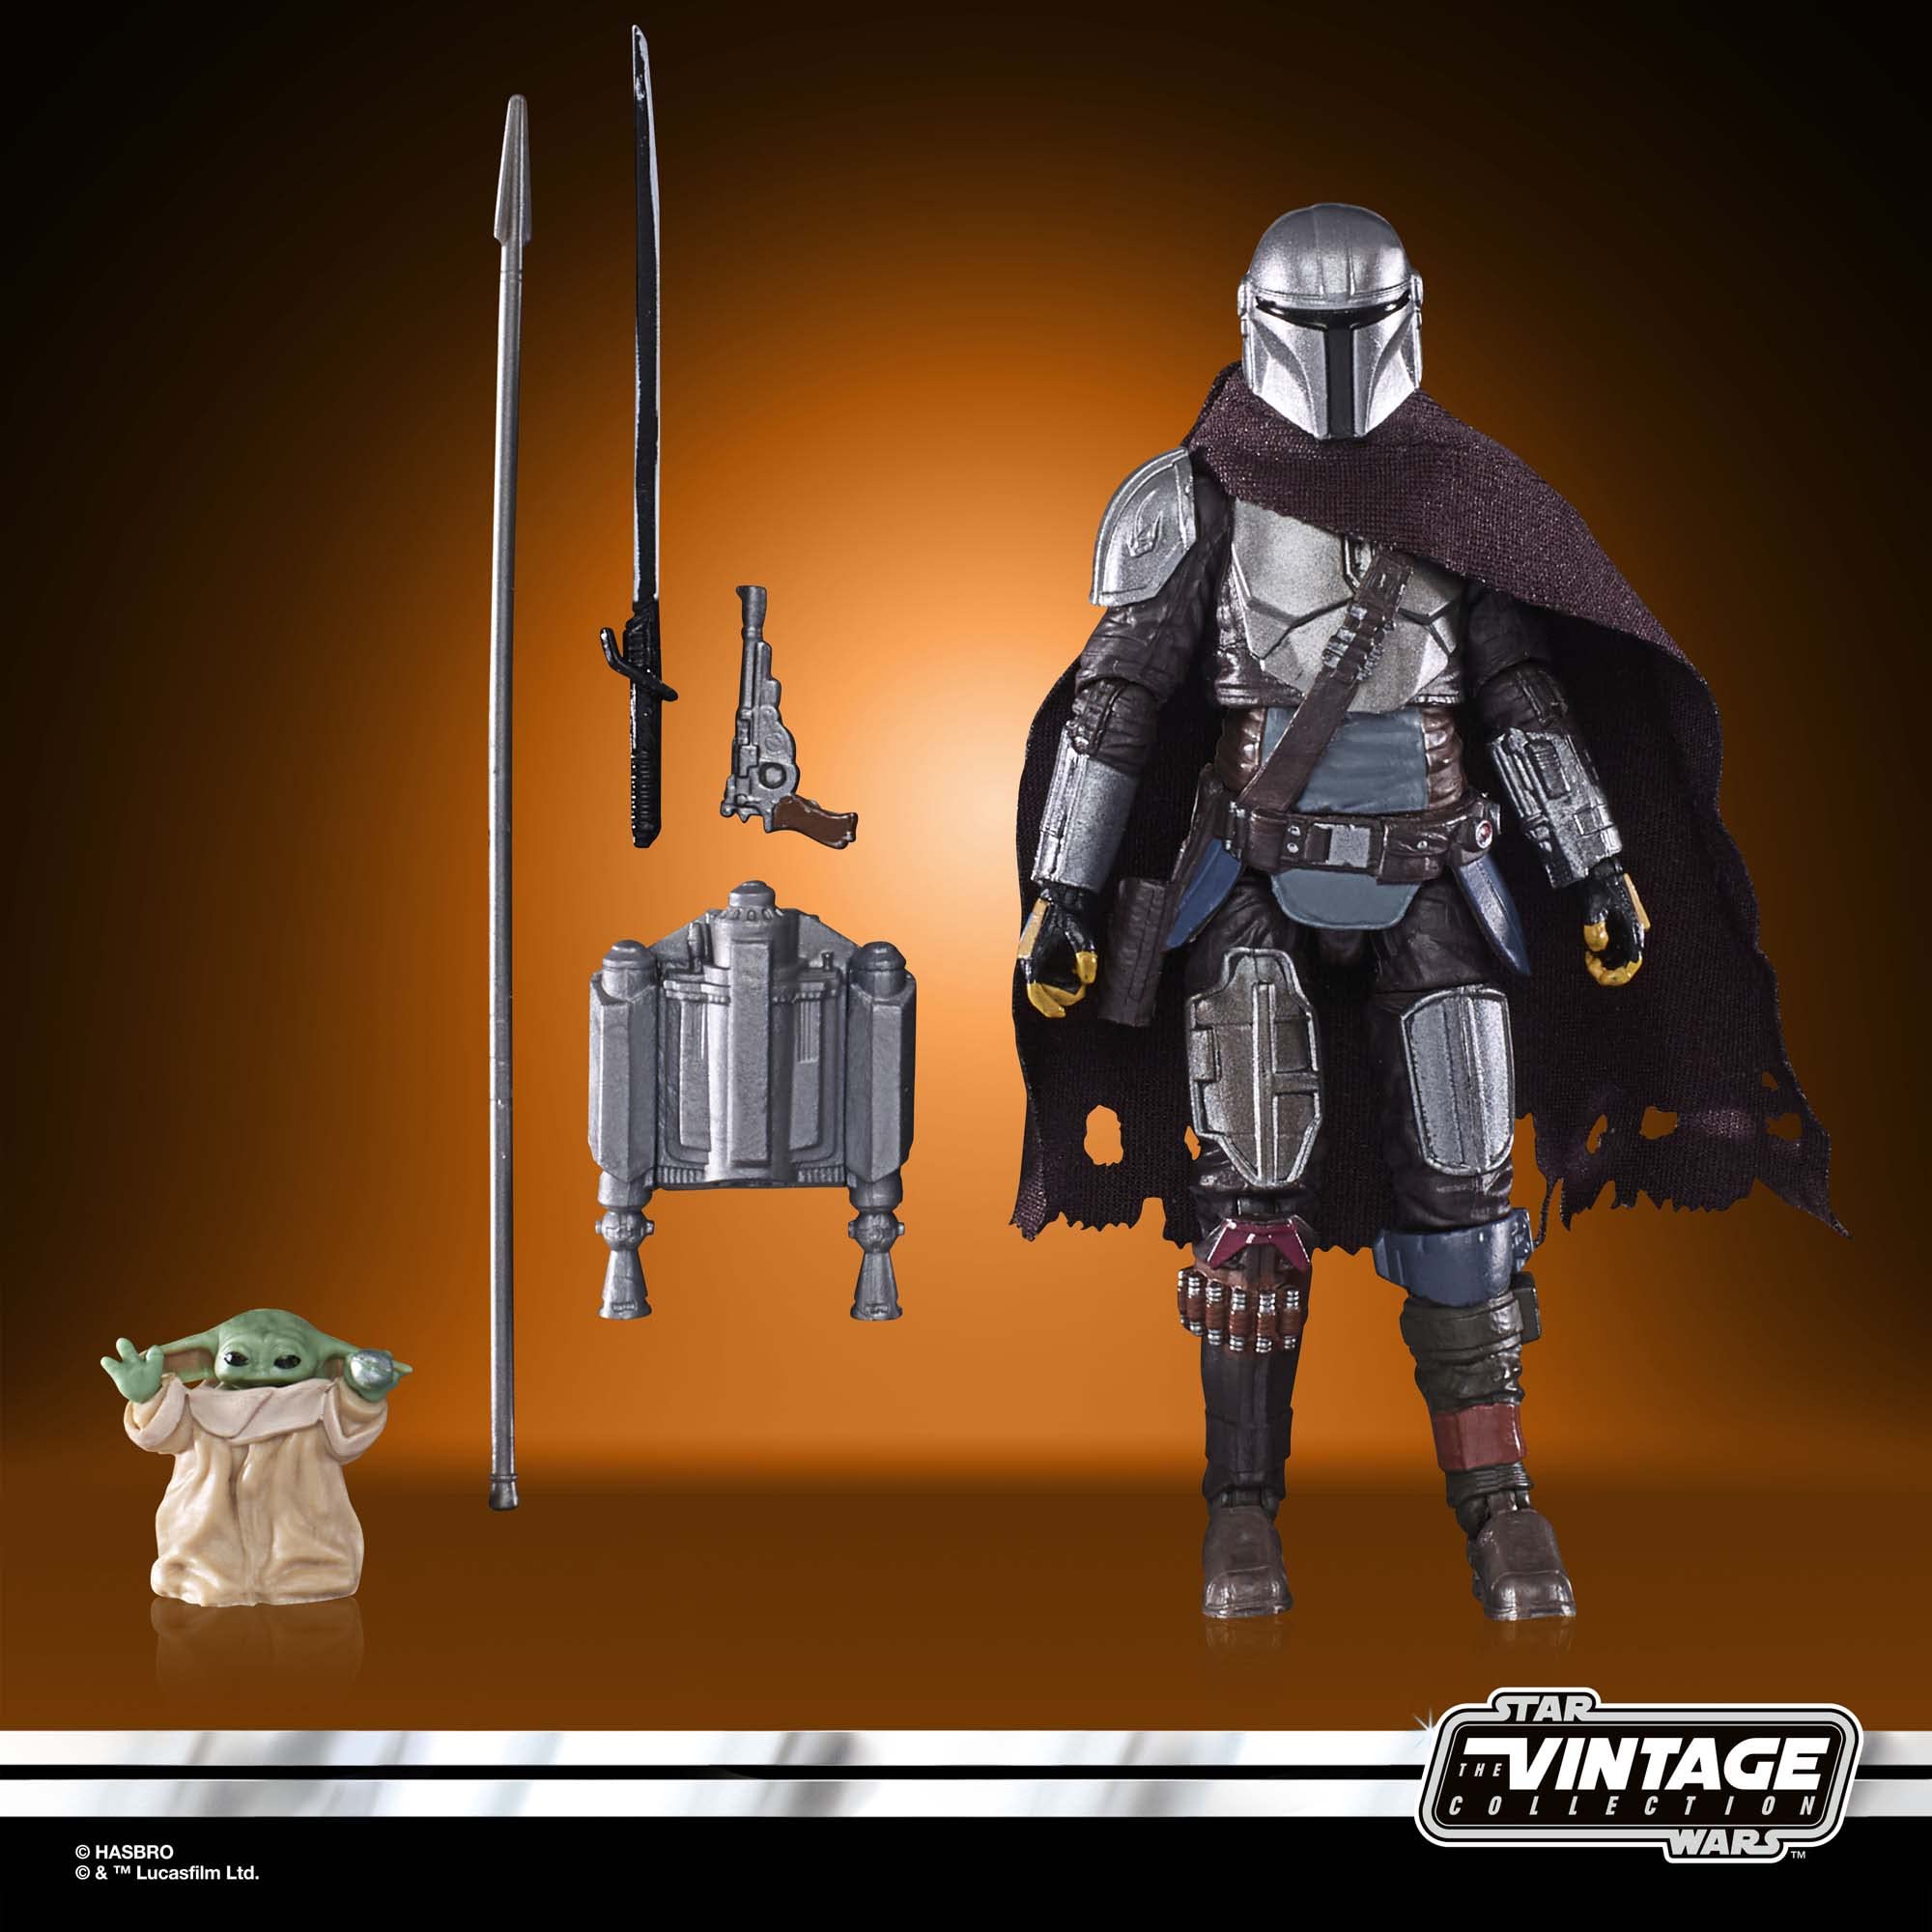 STAR WARS The Vintage Collection The Mandalorian’s N-1 Starfighter, The Mandalorian 3.75-Inch Vehicle & Action Figures, Ages 4 and Up